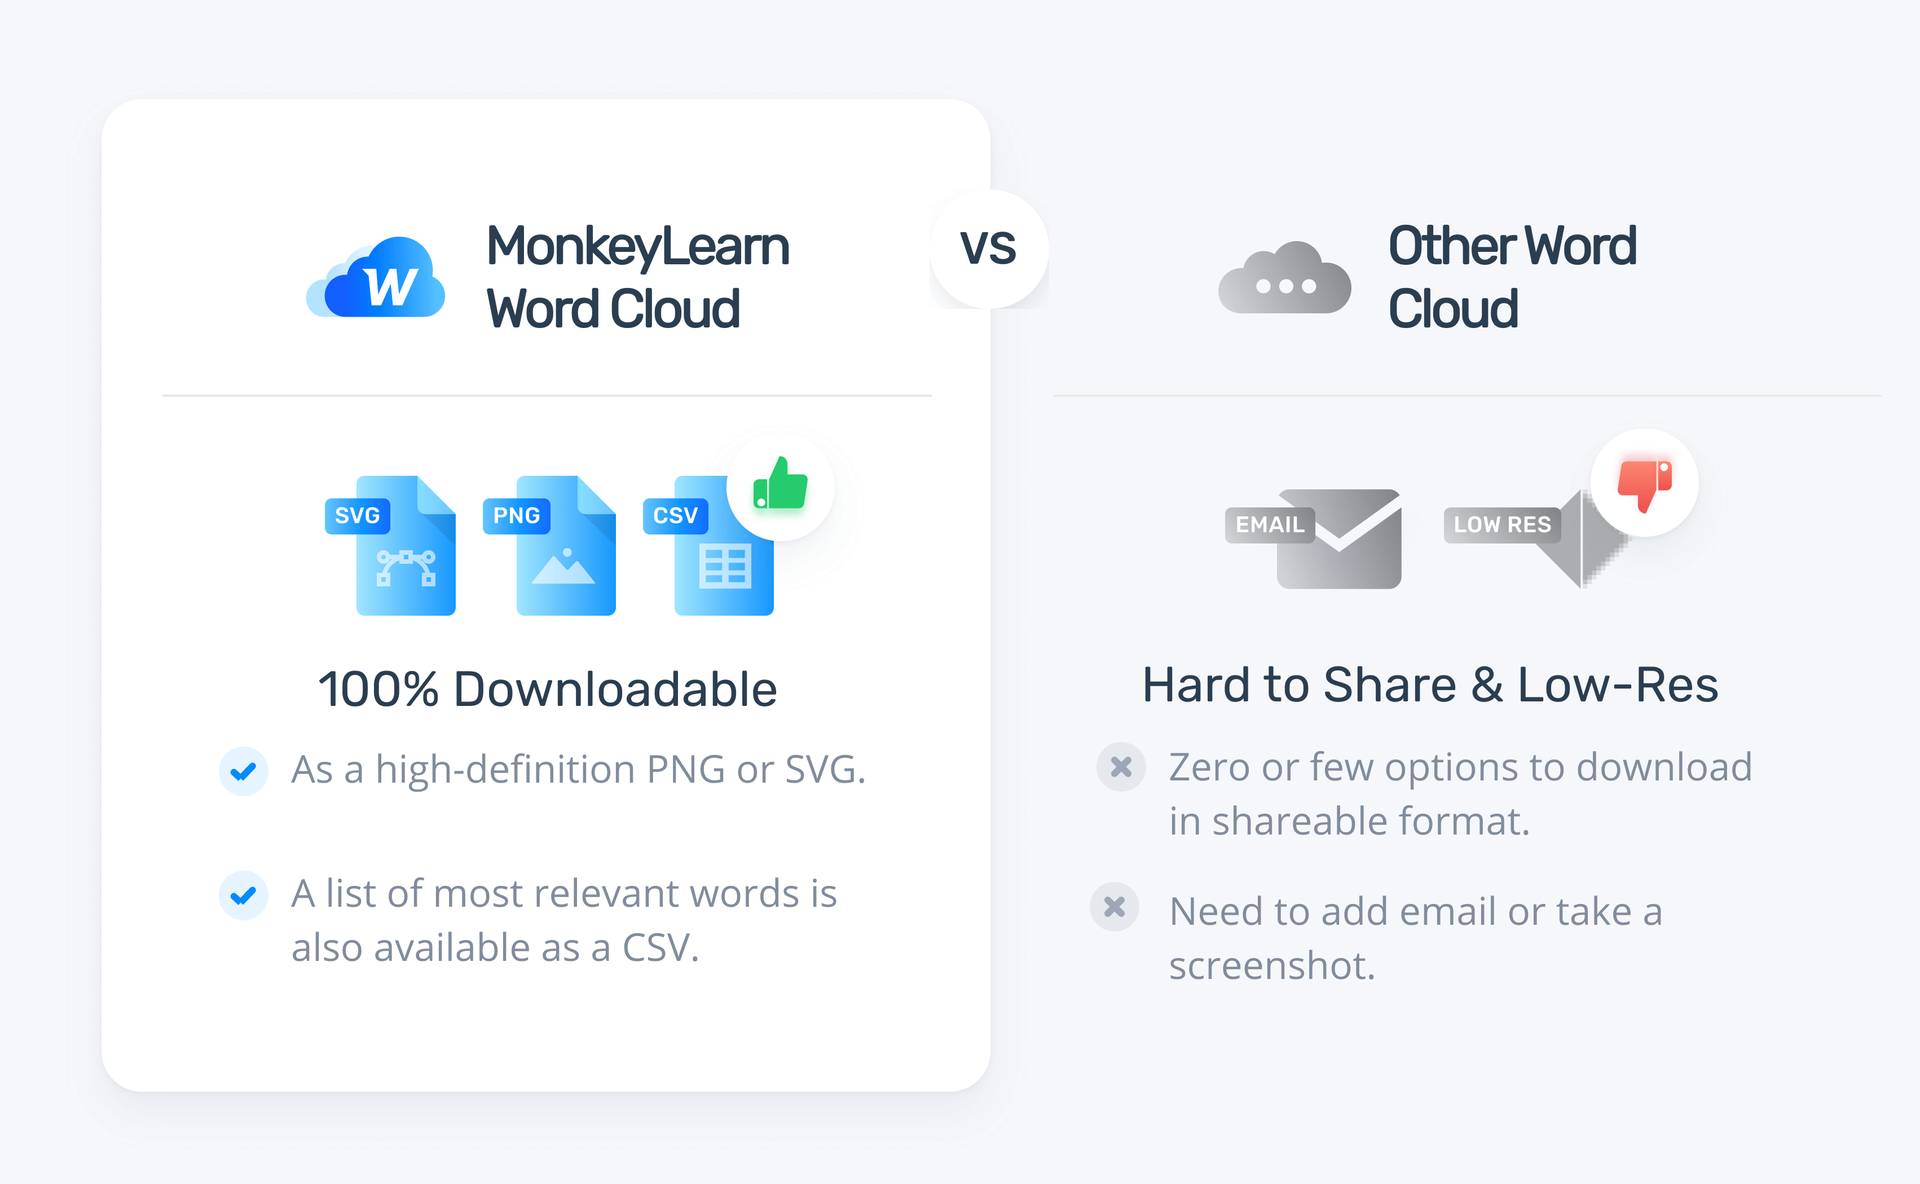 MonkeyLearn's options to download: CSV, PNG, SVG. Other word clouds provide low-res image options